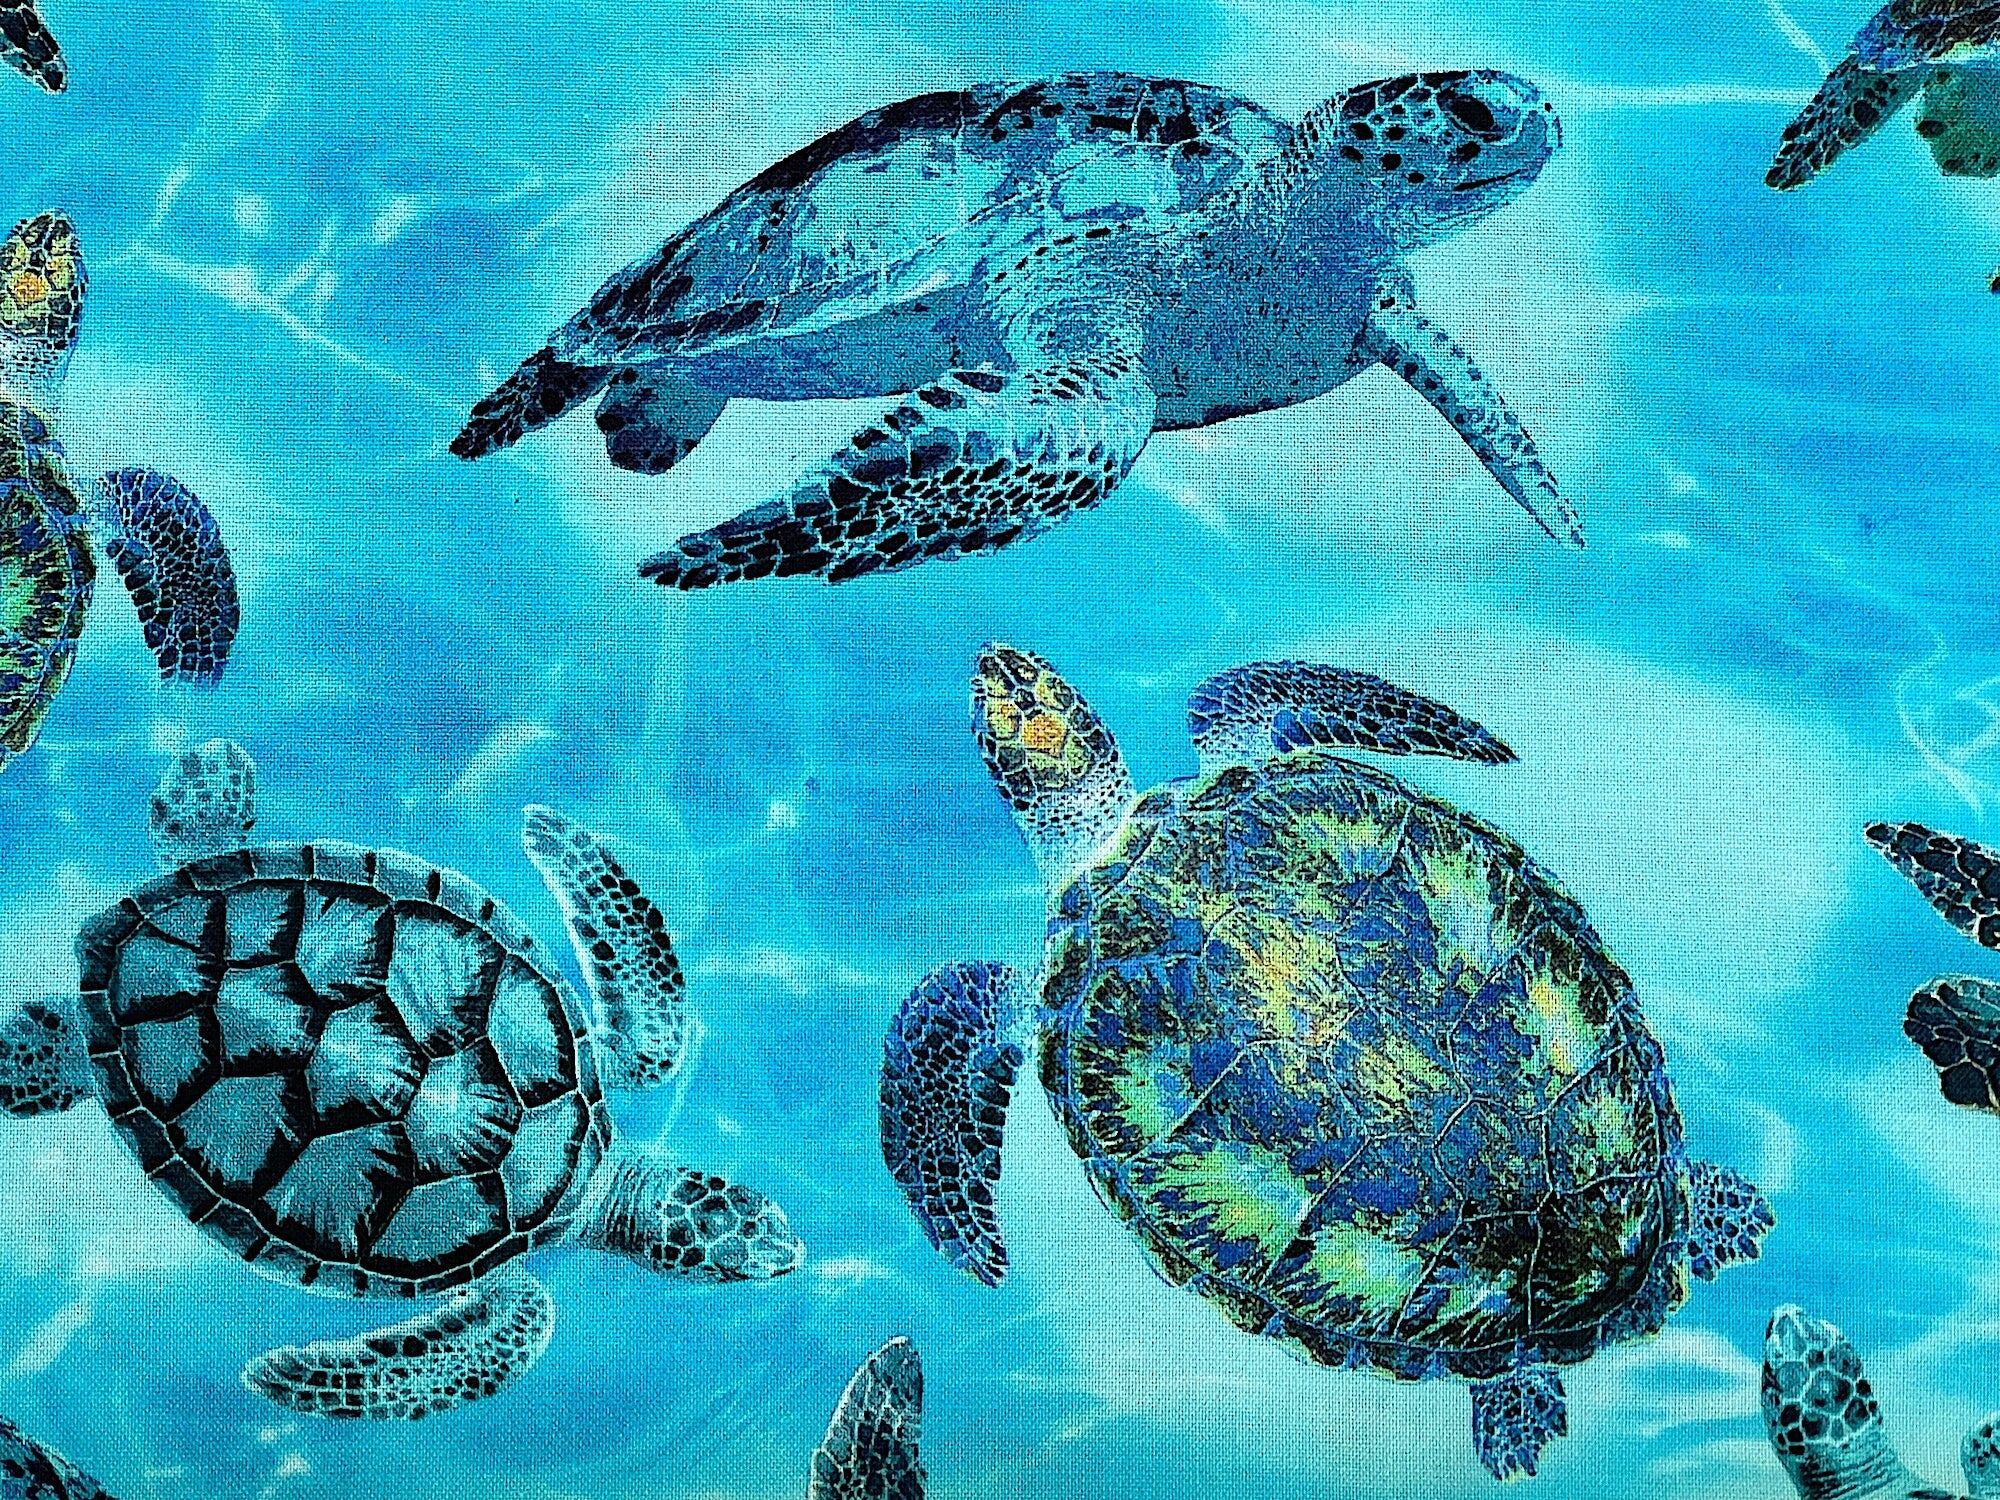 Close up of blue turtles swimming in the blue water.